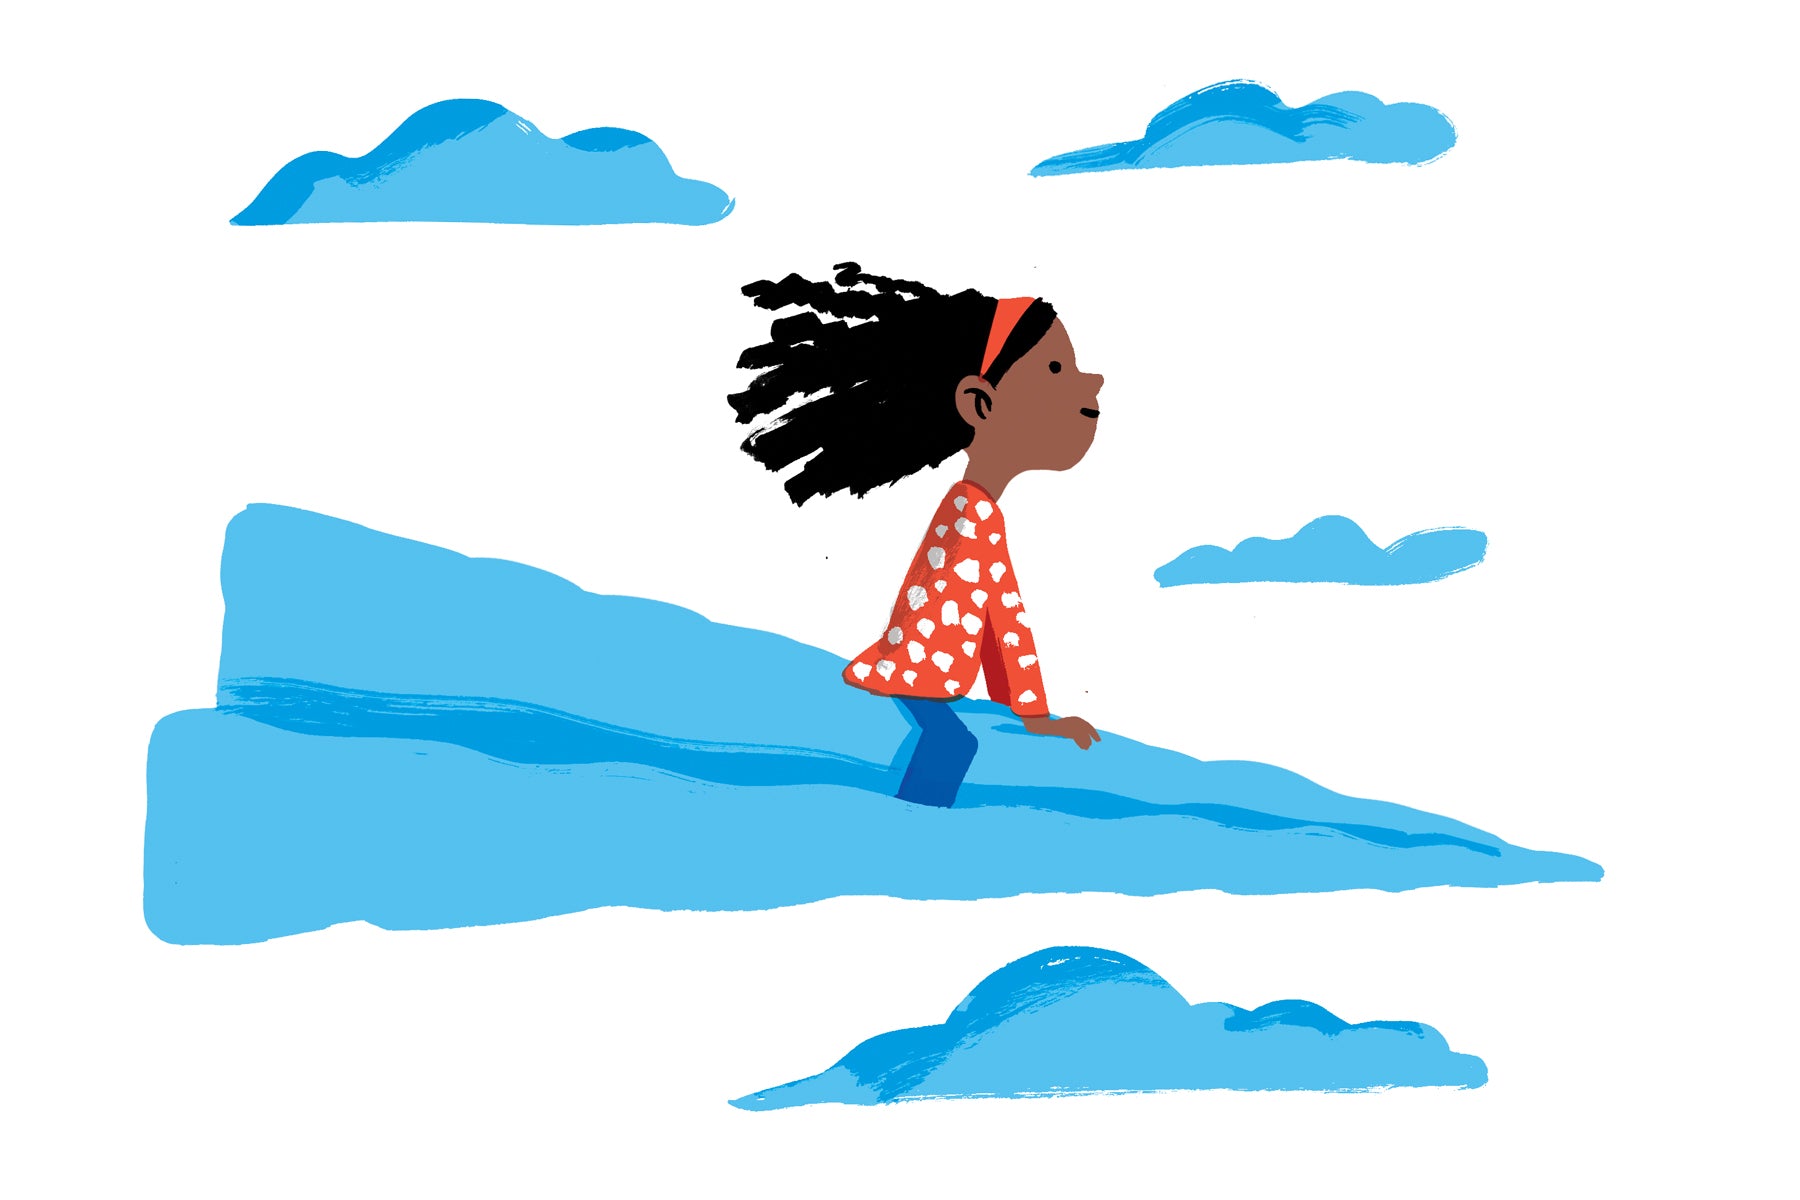 Illustration of a young black girl flying through the sky on a paper airplane. 